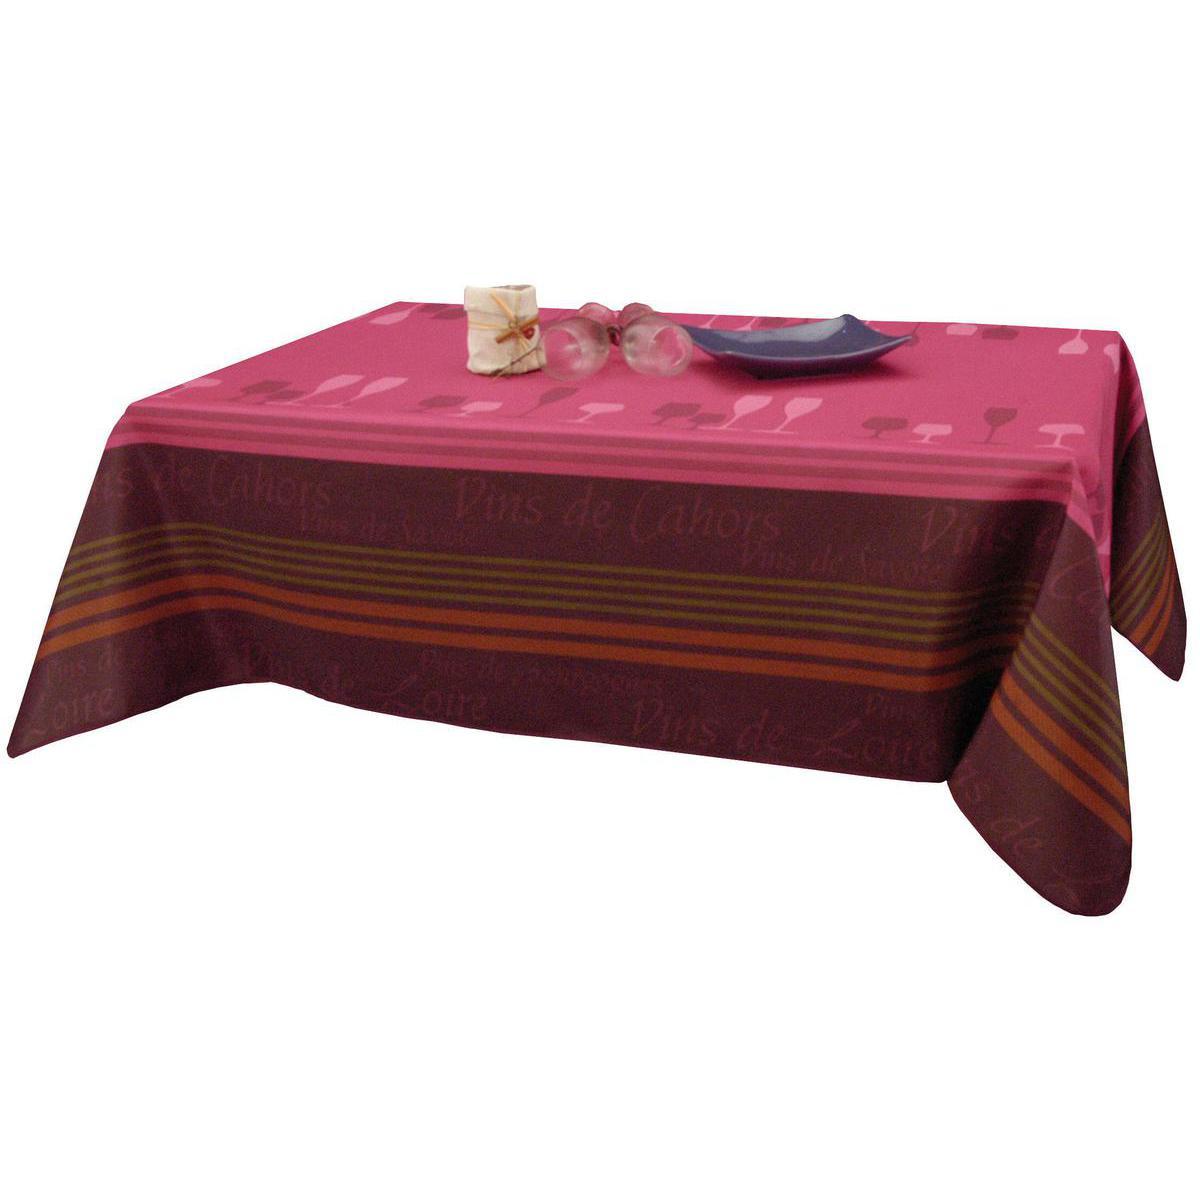 Nappe rectangulaire - Polyester - 145 x 300 cm - Rose